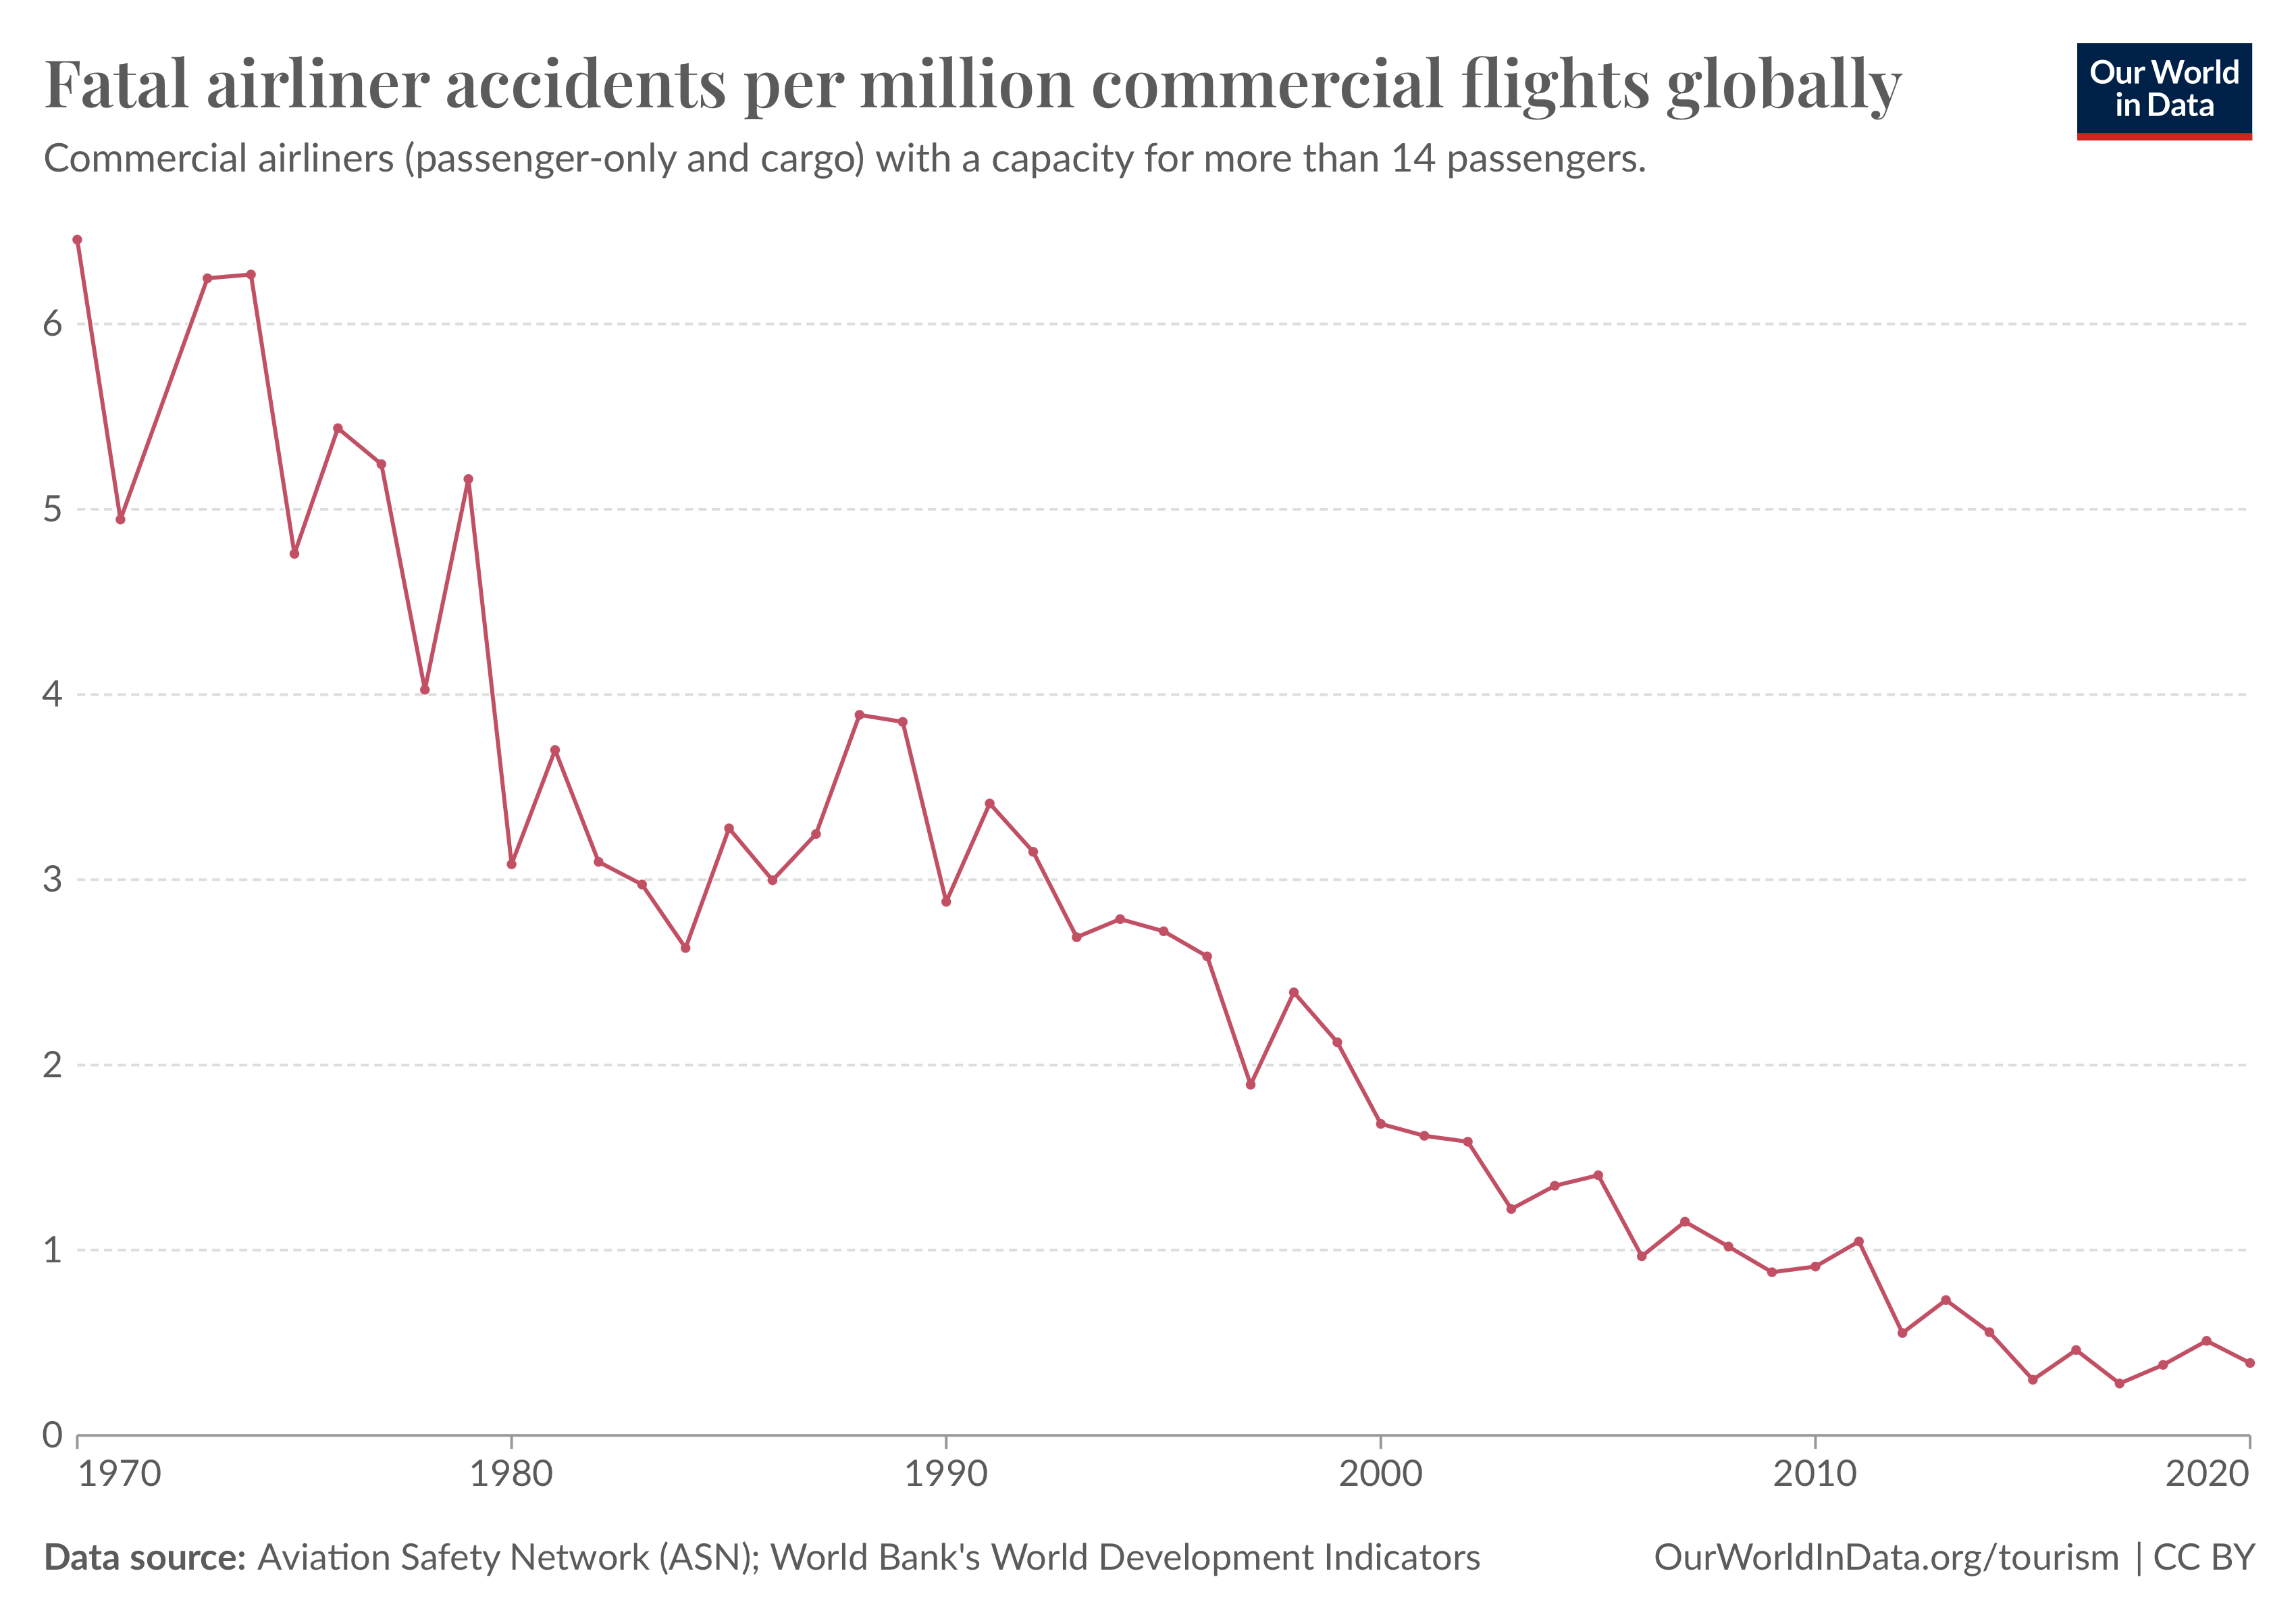 Line graph showing the rate of fatal airliner accidents per million commercial flights globally from 1970 to 2020. The graph depicts a general declining trend over the 50-year period. It starts with fluctuations around 5 to 6 accidents per million flights in the early 1970s, followed by a variable but overall downward trend leading to less than 2 accidents per million flights by 2020. This indicates an improvement in aviation safety over time. Data sources include the Aviation Safety Network (ASN) and the World Bank's World Development Indicators. The chart is provided by OurWorldInData.org/tourism and is licensed under CC BY